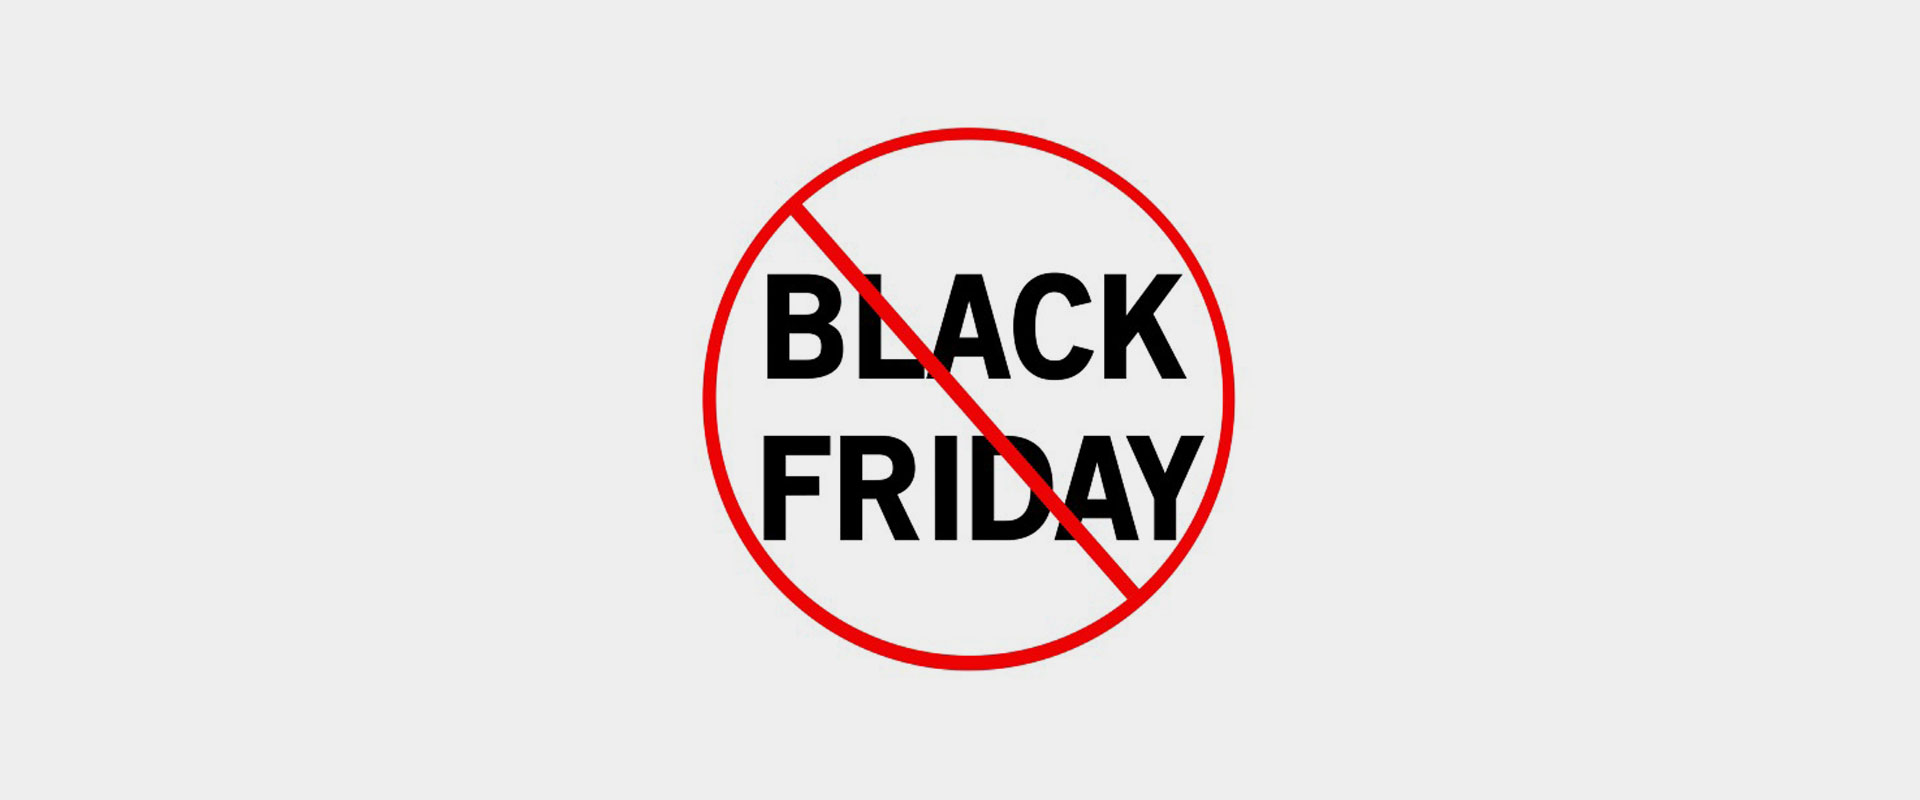 Why We Don't Offer Black Friday Deals